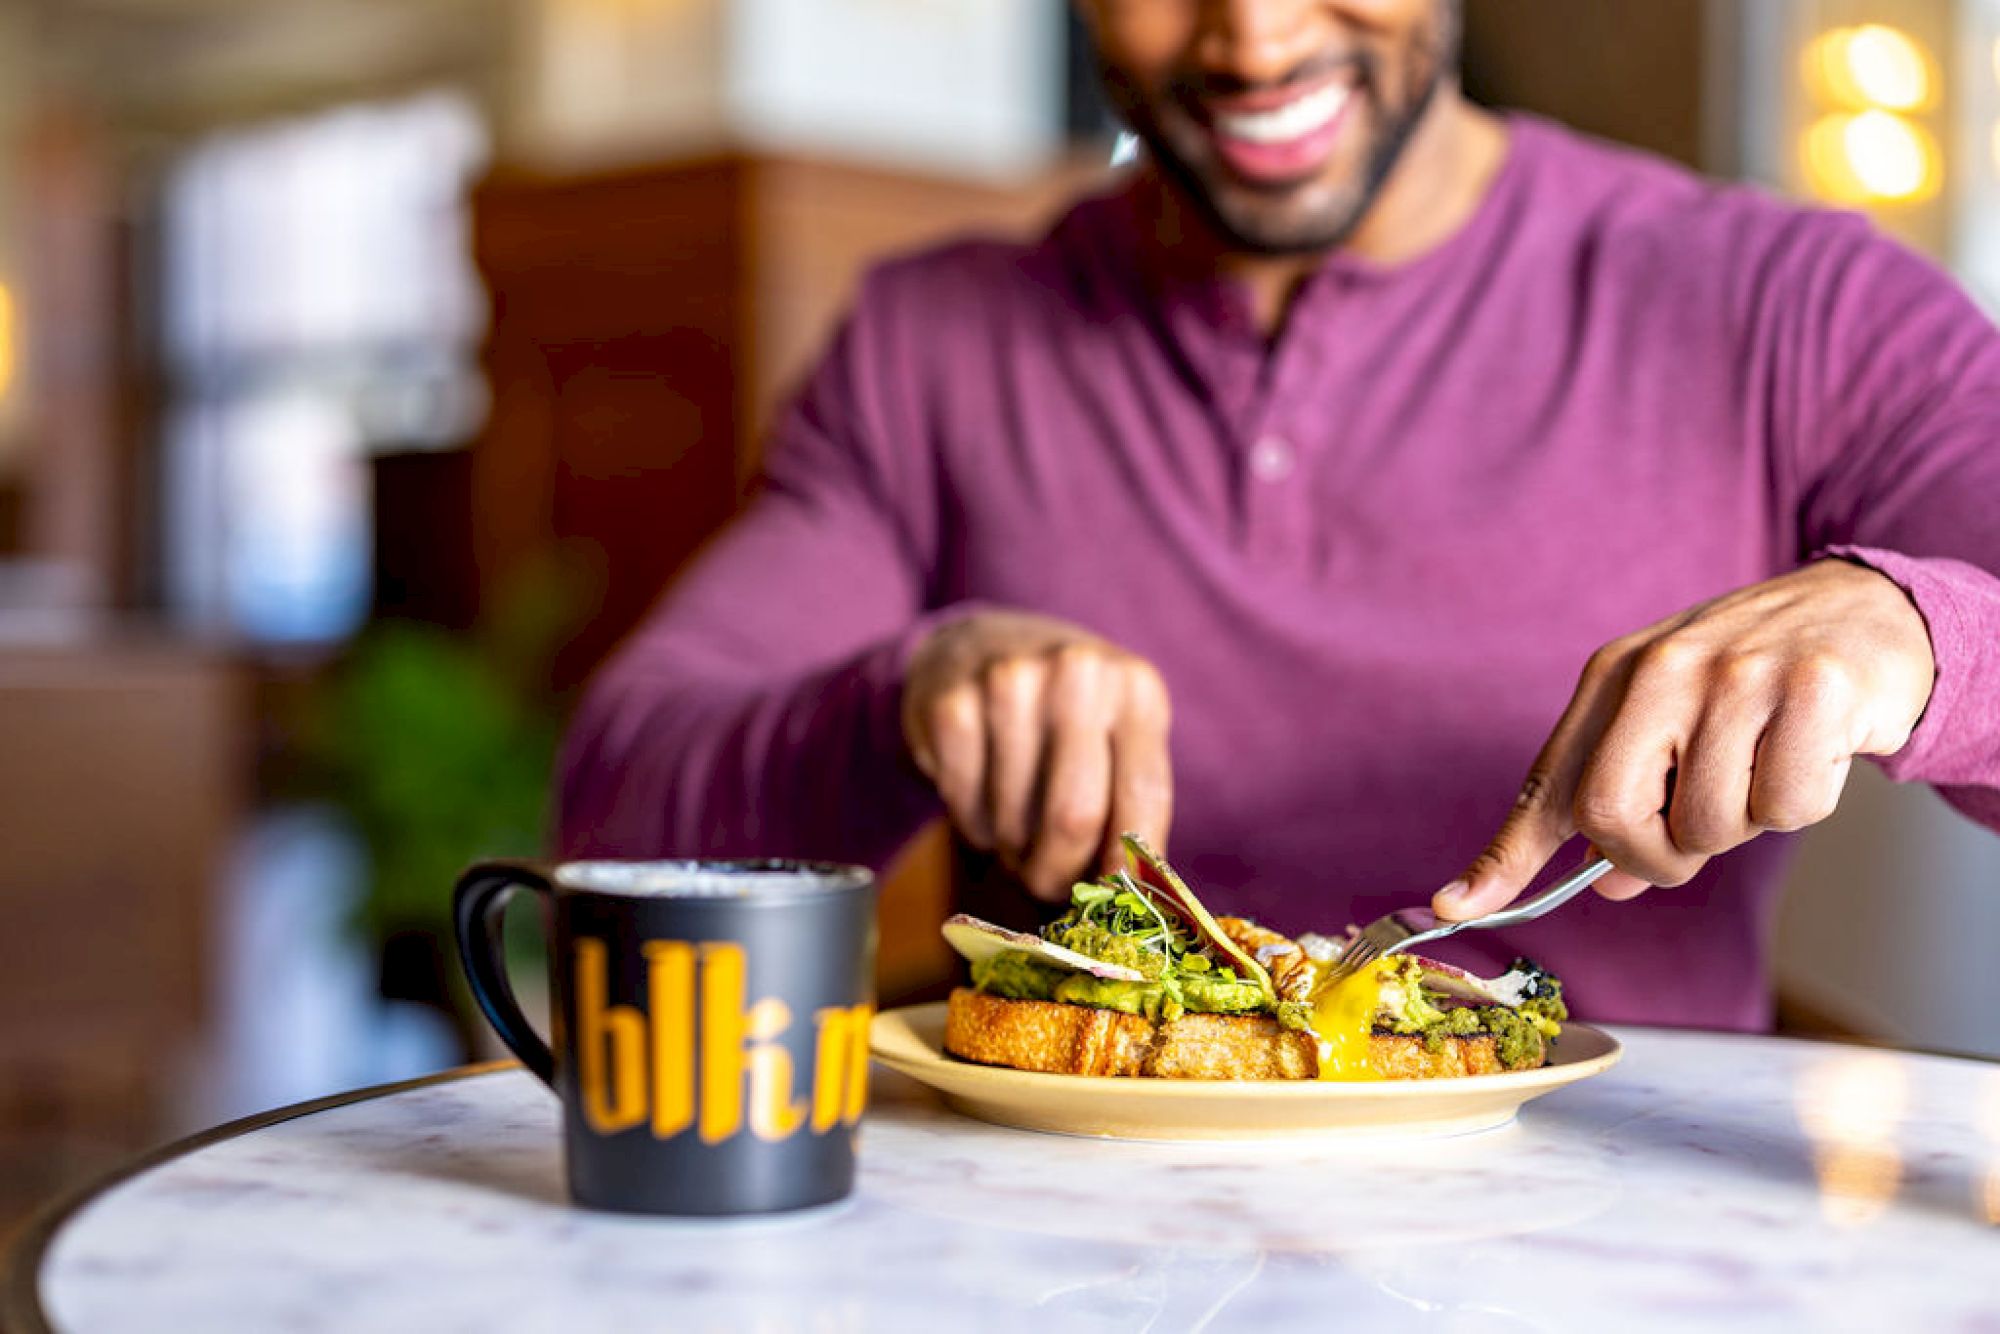 A person is cutting food on a plate while smiling, with a black mug that appears to say 